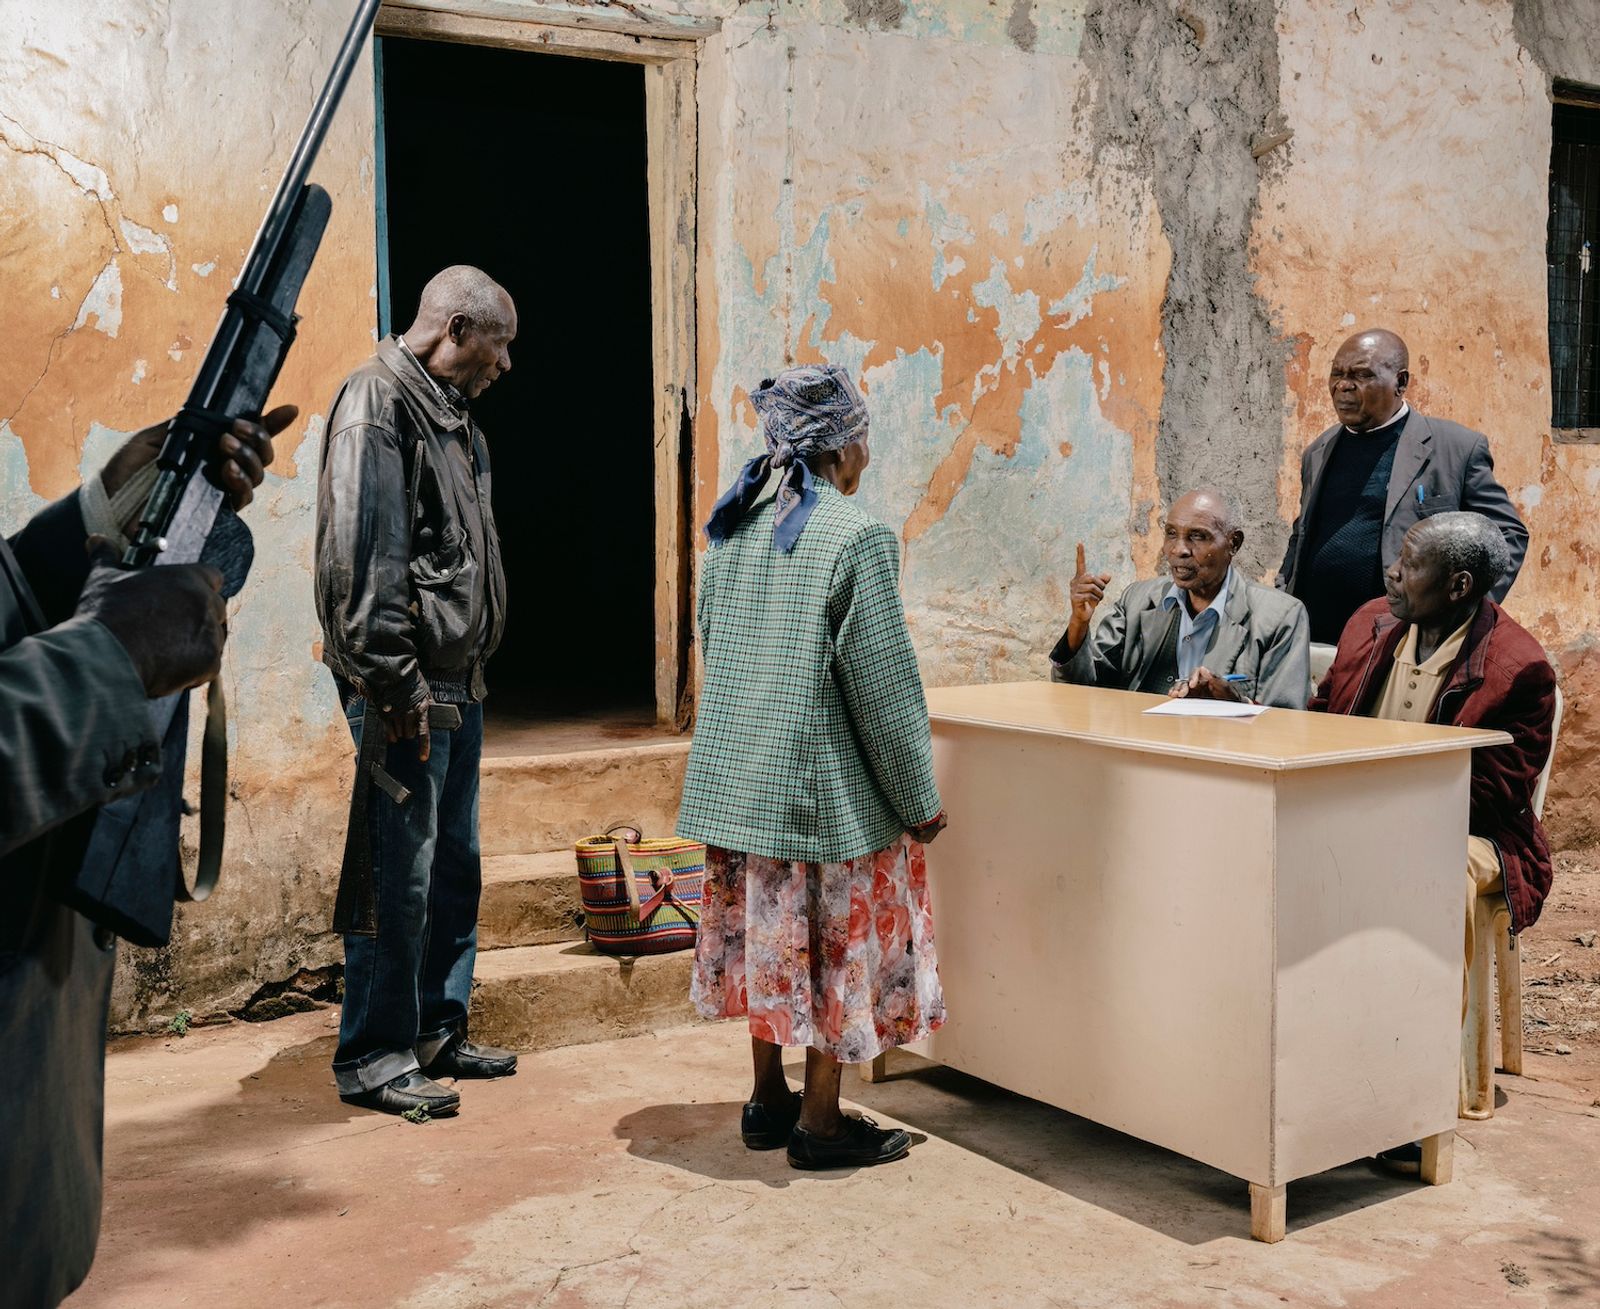 Photobook Review: State of Emergency by Max Pinckers et al.